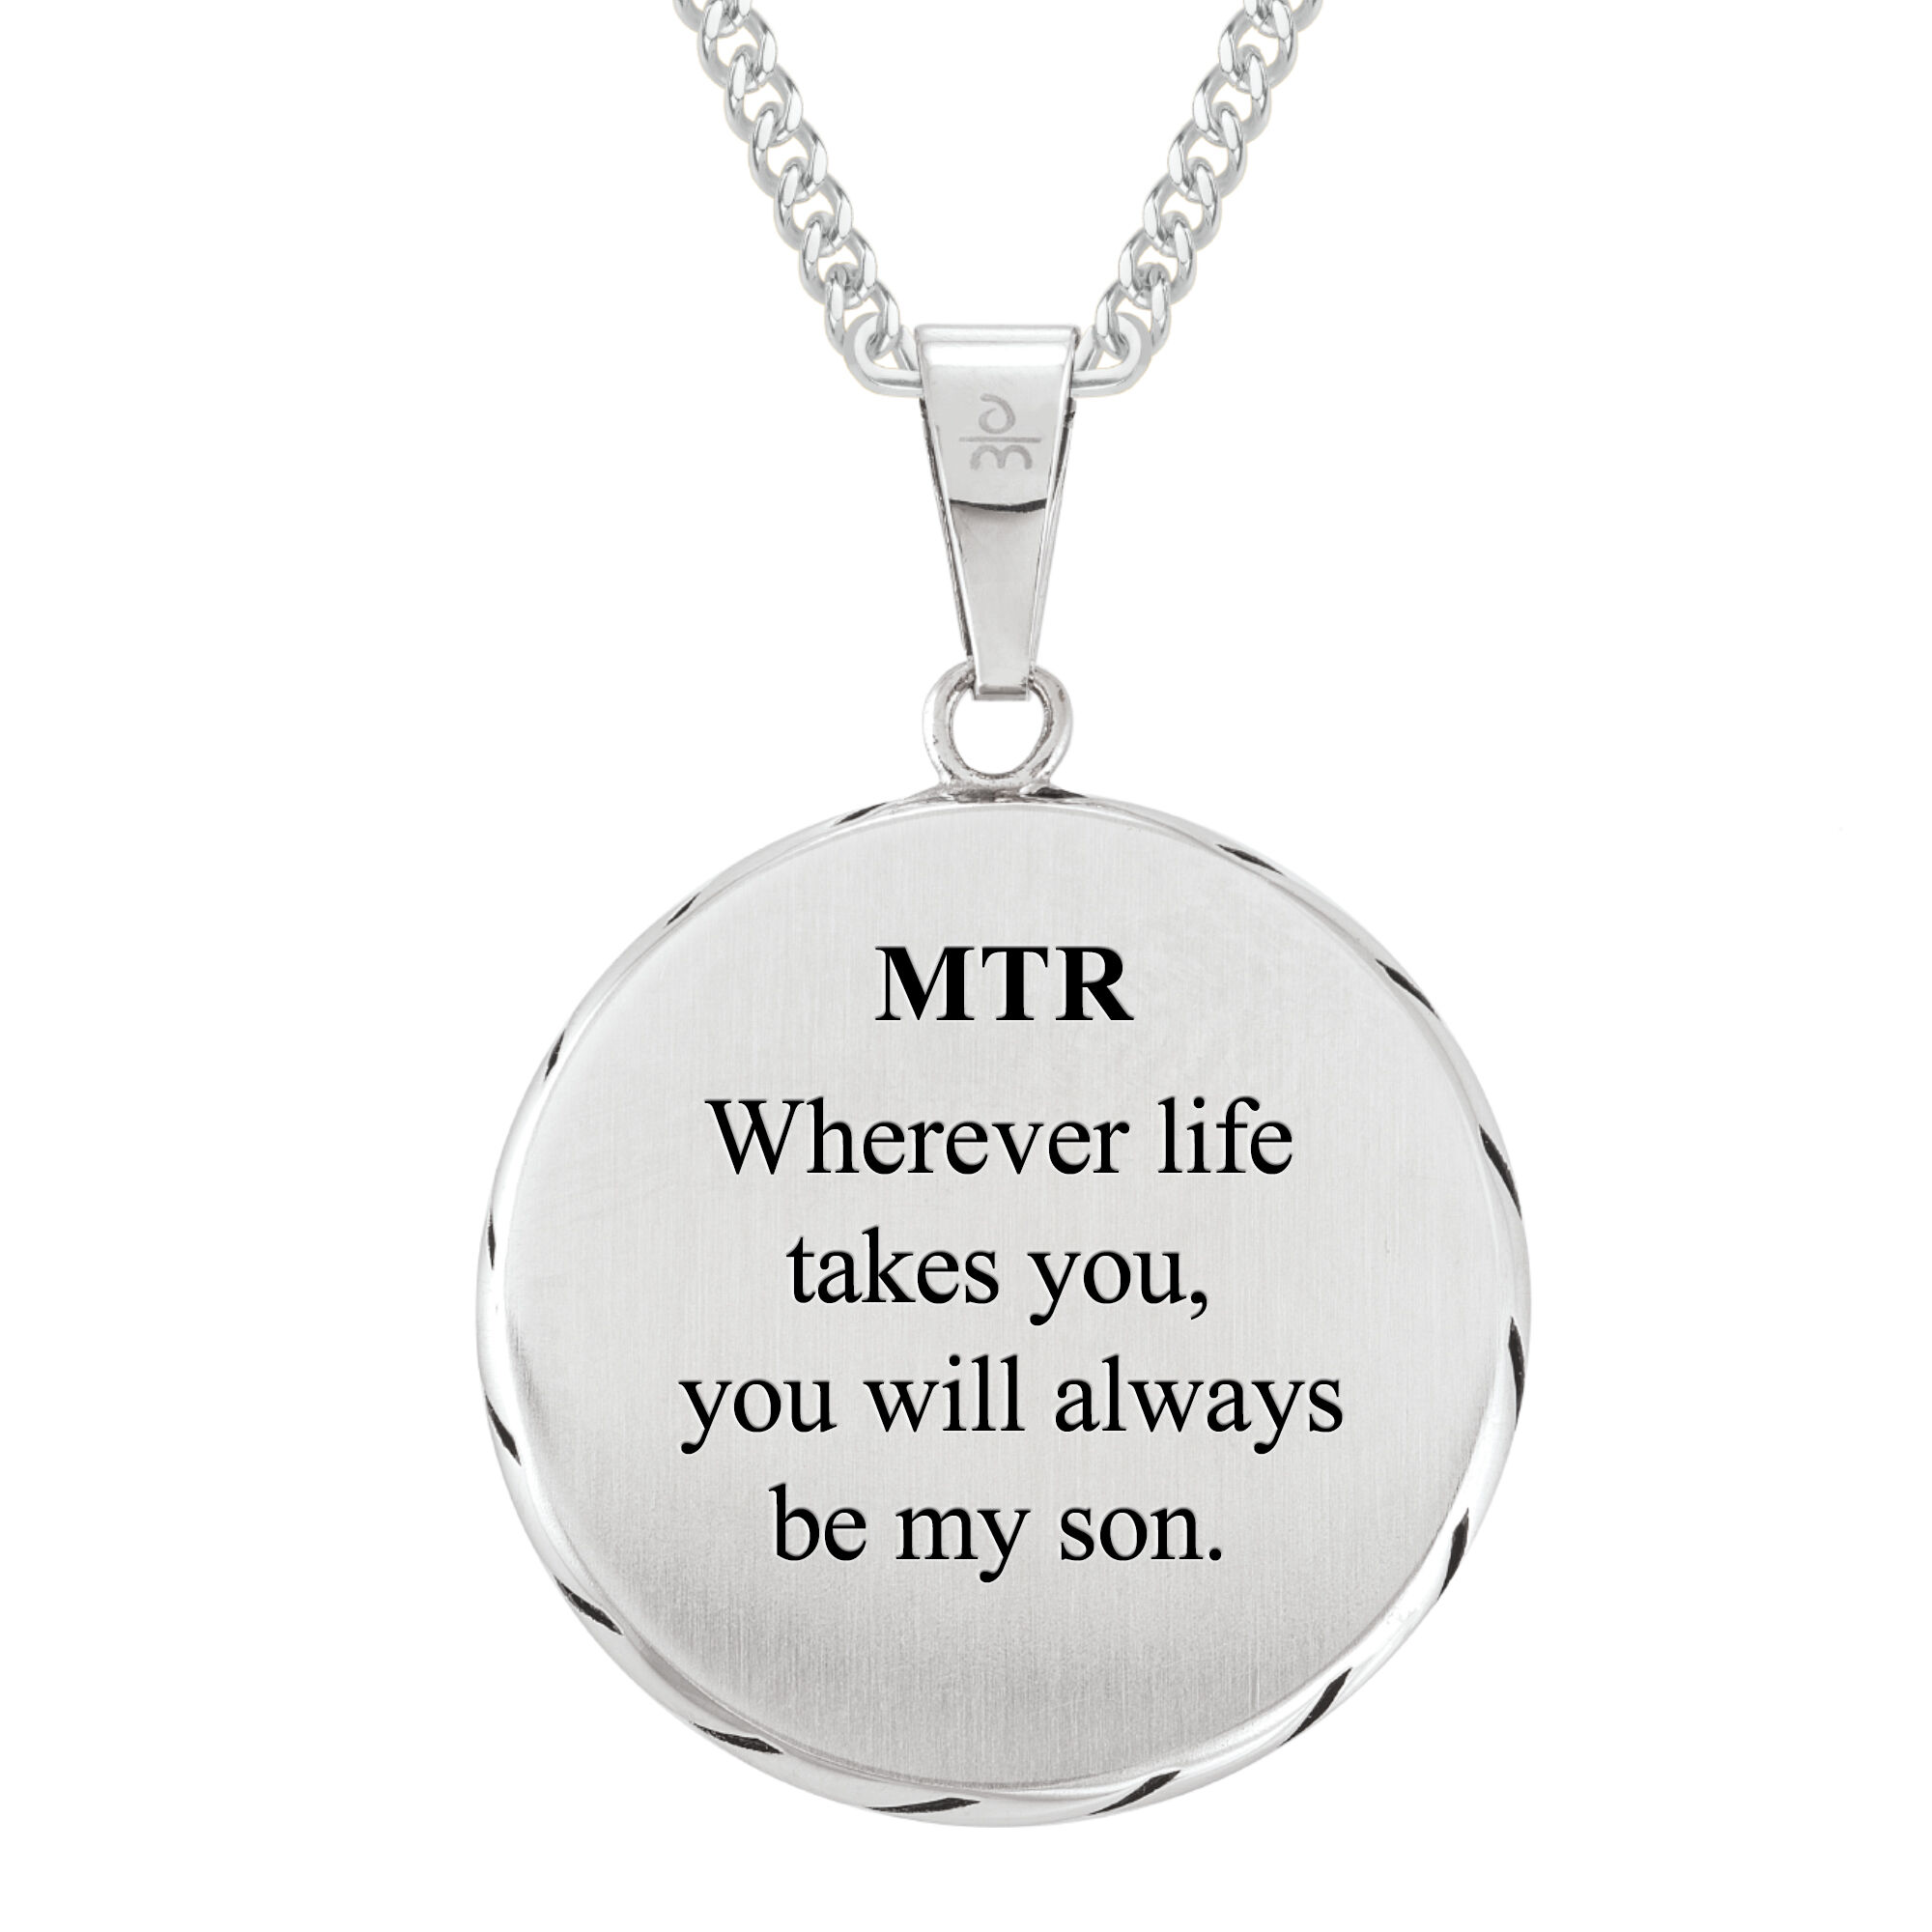 For My Son Personalized Compass Pendant 6464 0014 c back